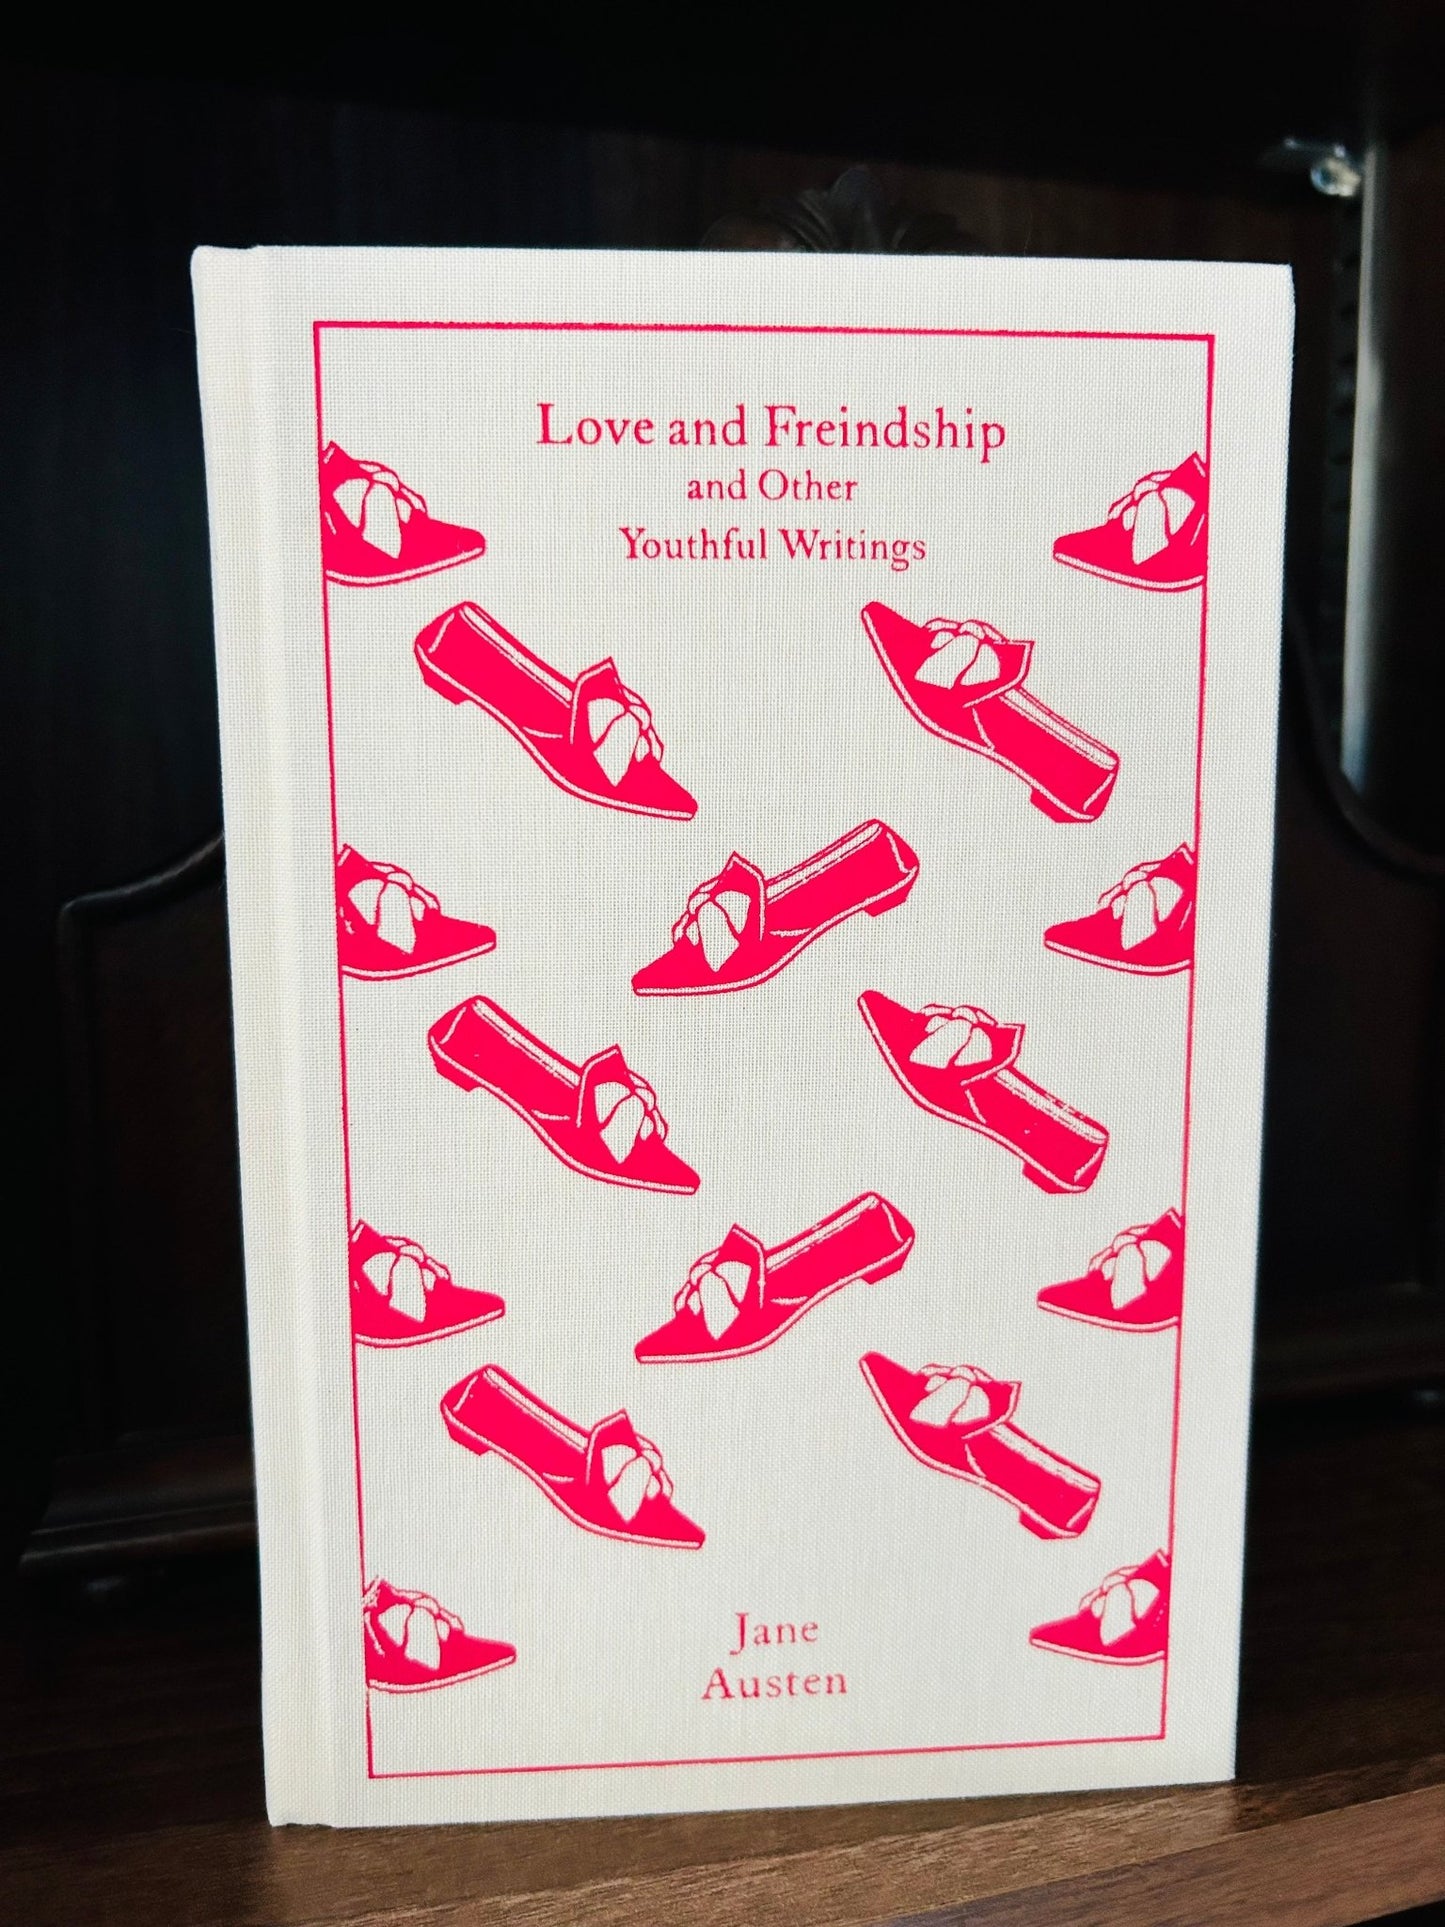 Love and Friendship and Other Youthful Writings by Jane Austen Penguin Clothbound Edition - Looking Glass Books -